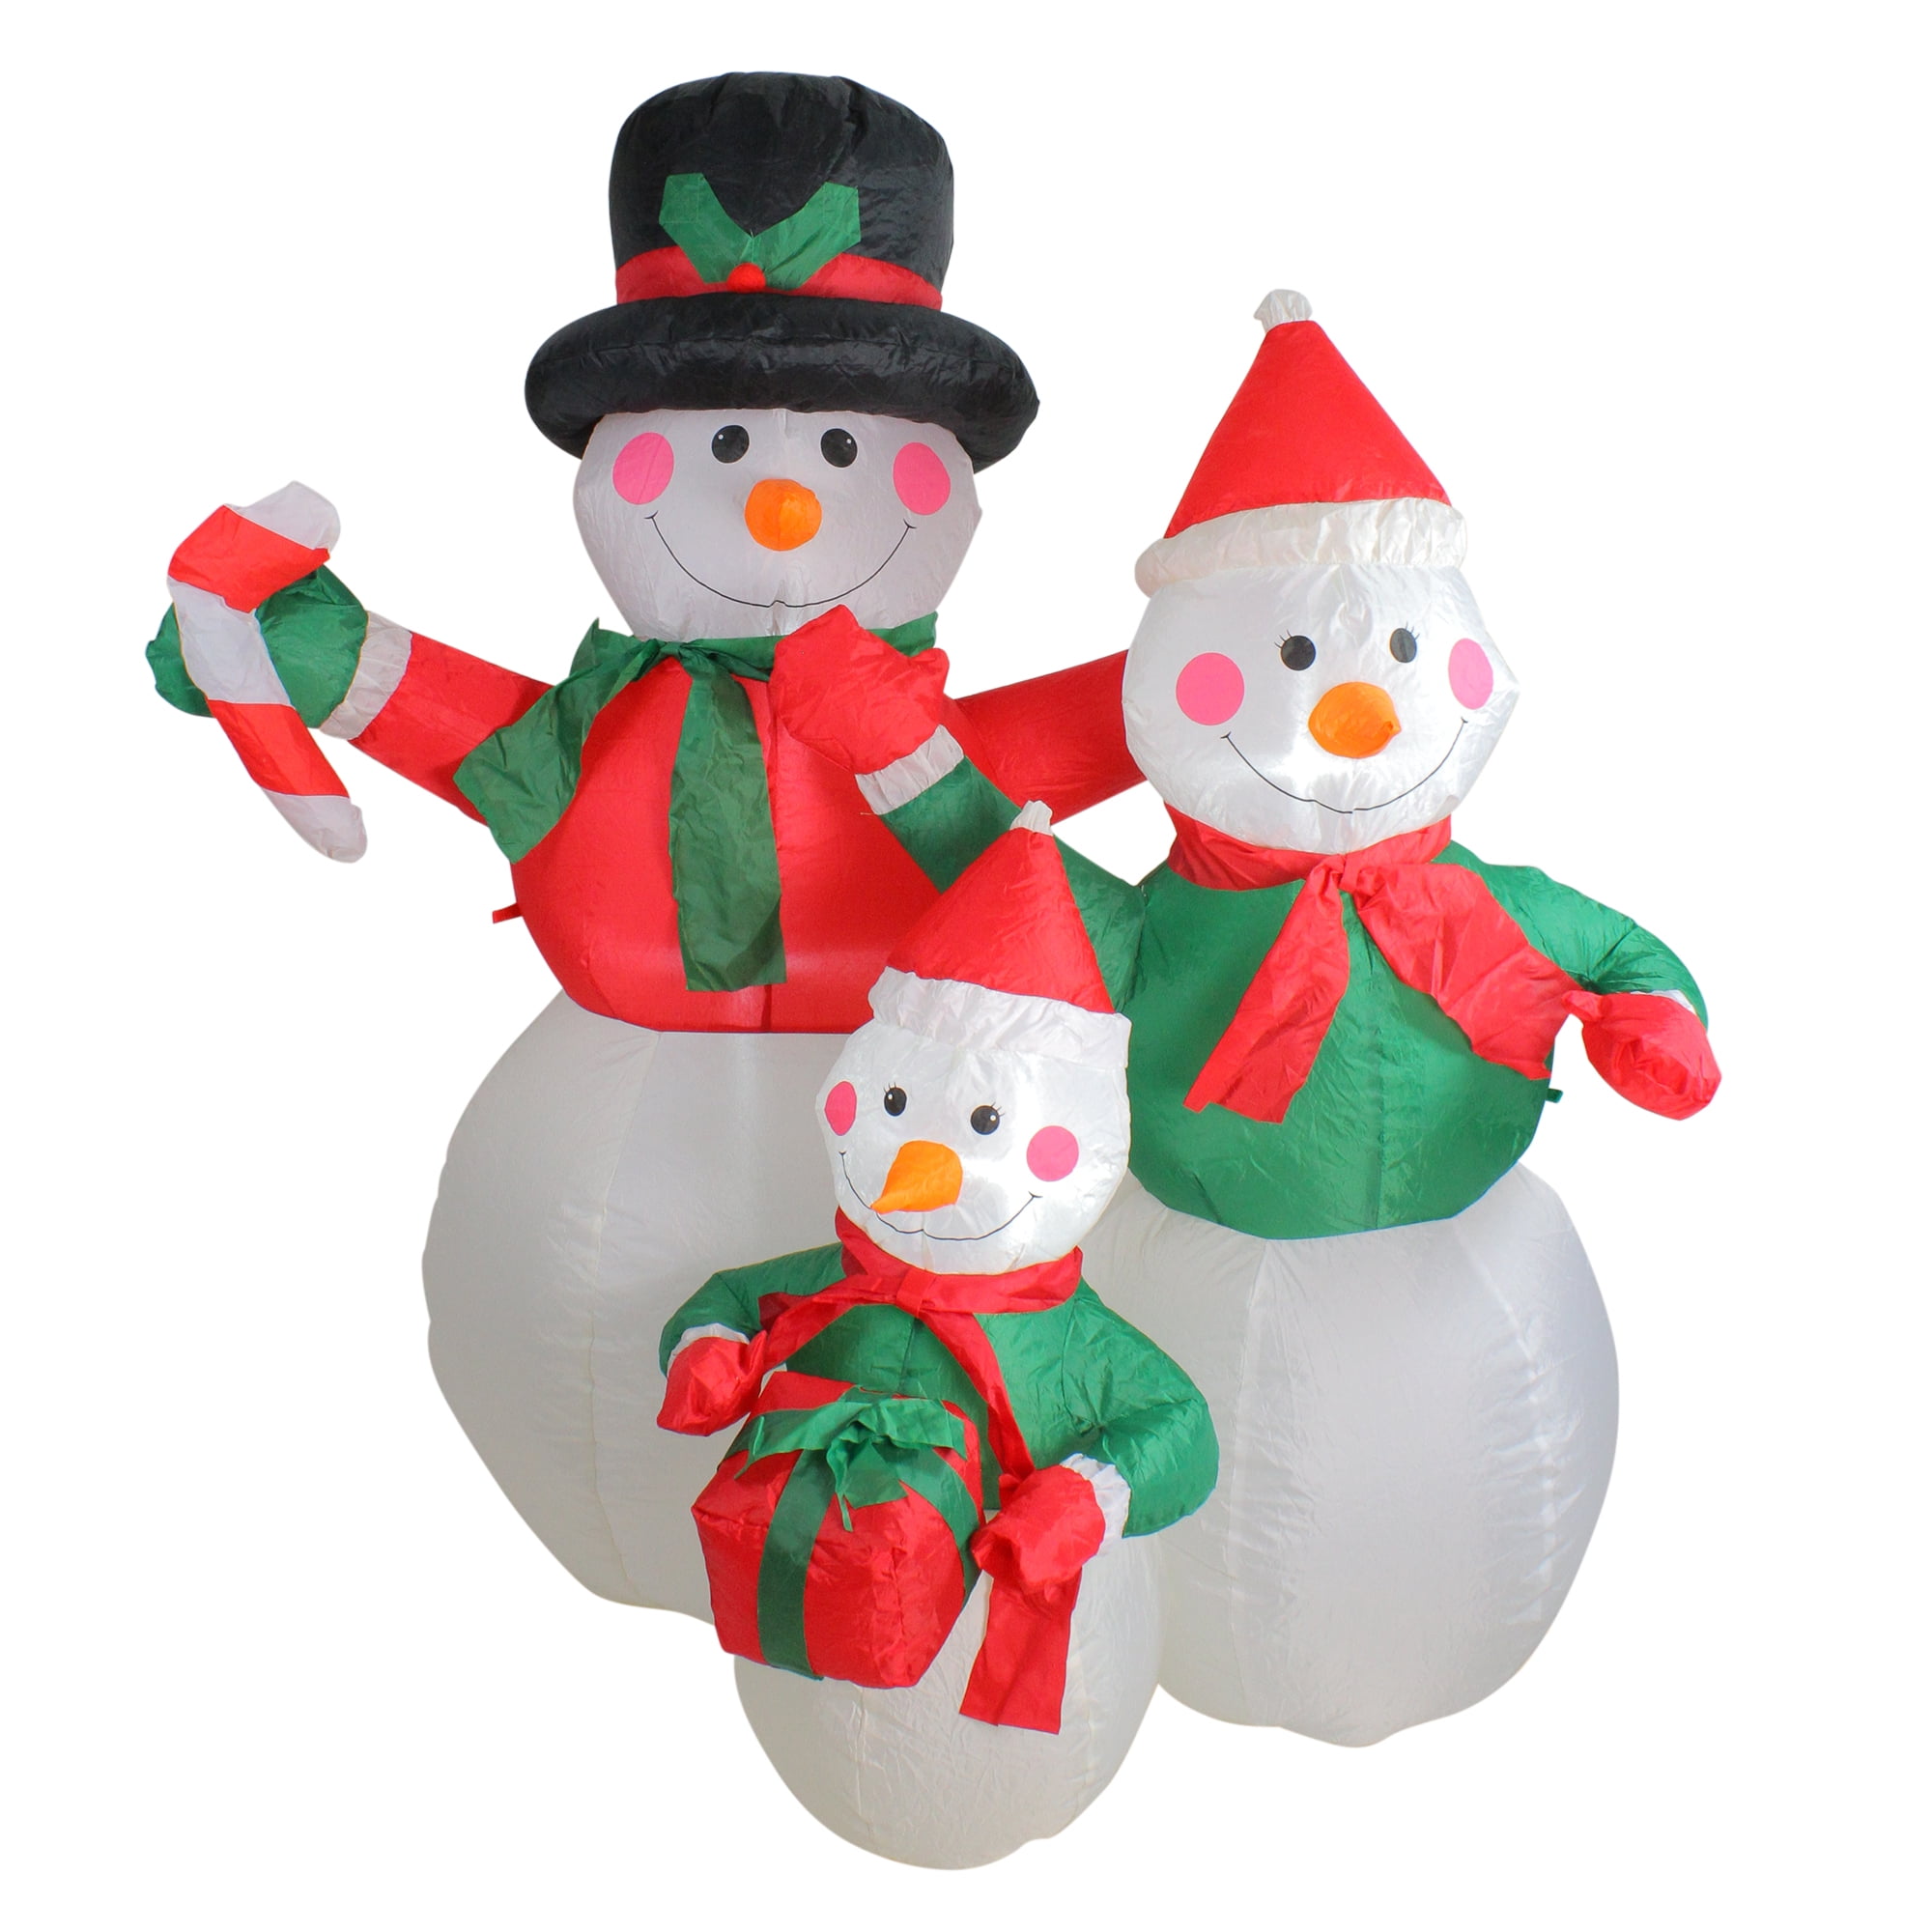 HOMCOM 8ft Tall Giant Outdoor Indoor Inflatable Snowman Christmas Decoration for Lawn Yard with Hat Scarf LED Lights Carrying Merry Christmas Banner Red Green and White